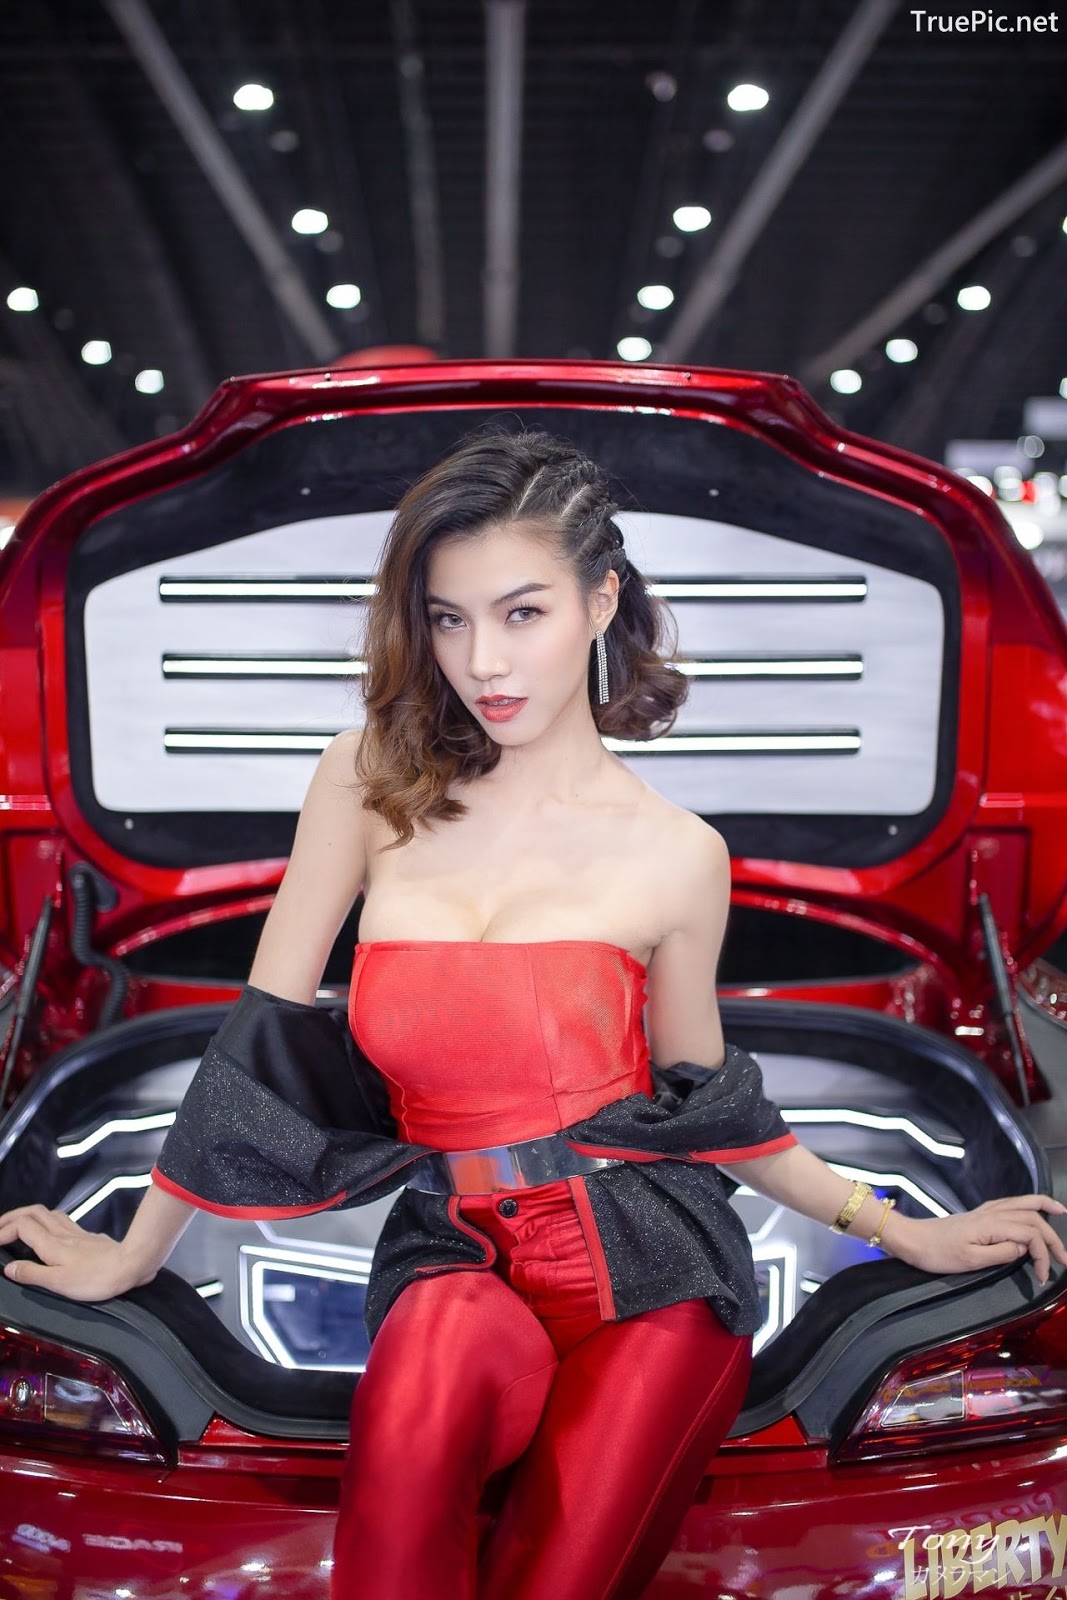 Image-Thailand-Hot-Model-Thai-Racing-Girl-At-Motor-Expo-2019-TruePic.net- Picture-99